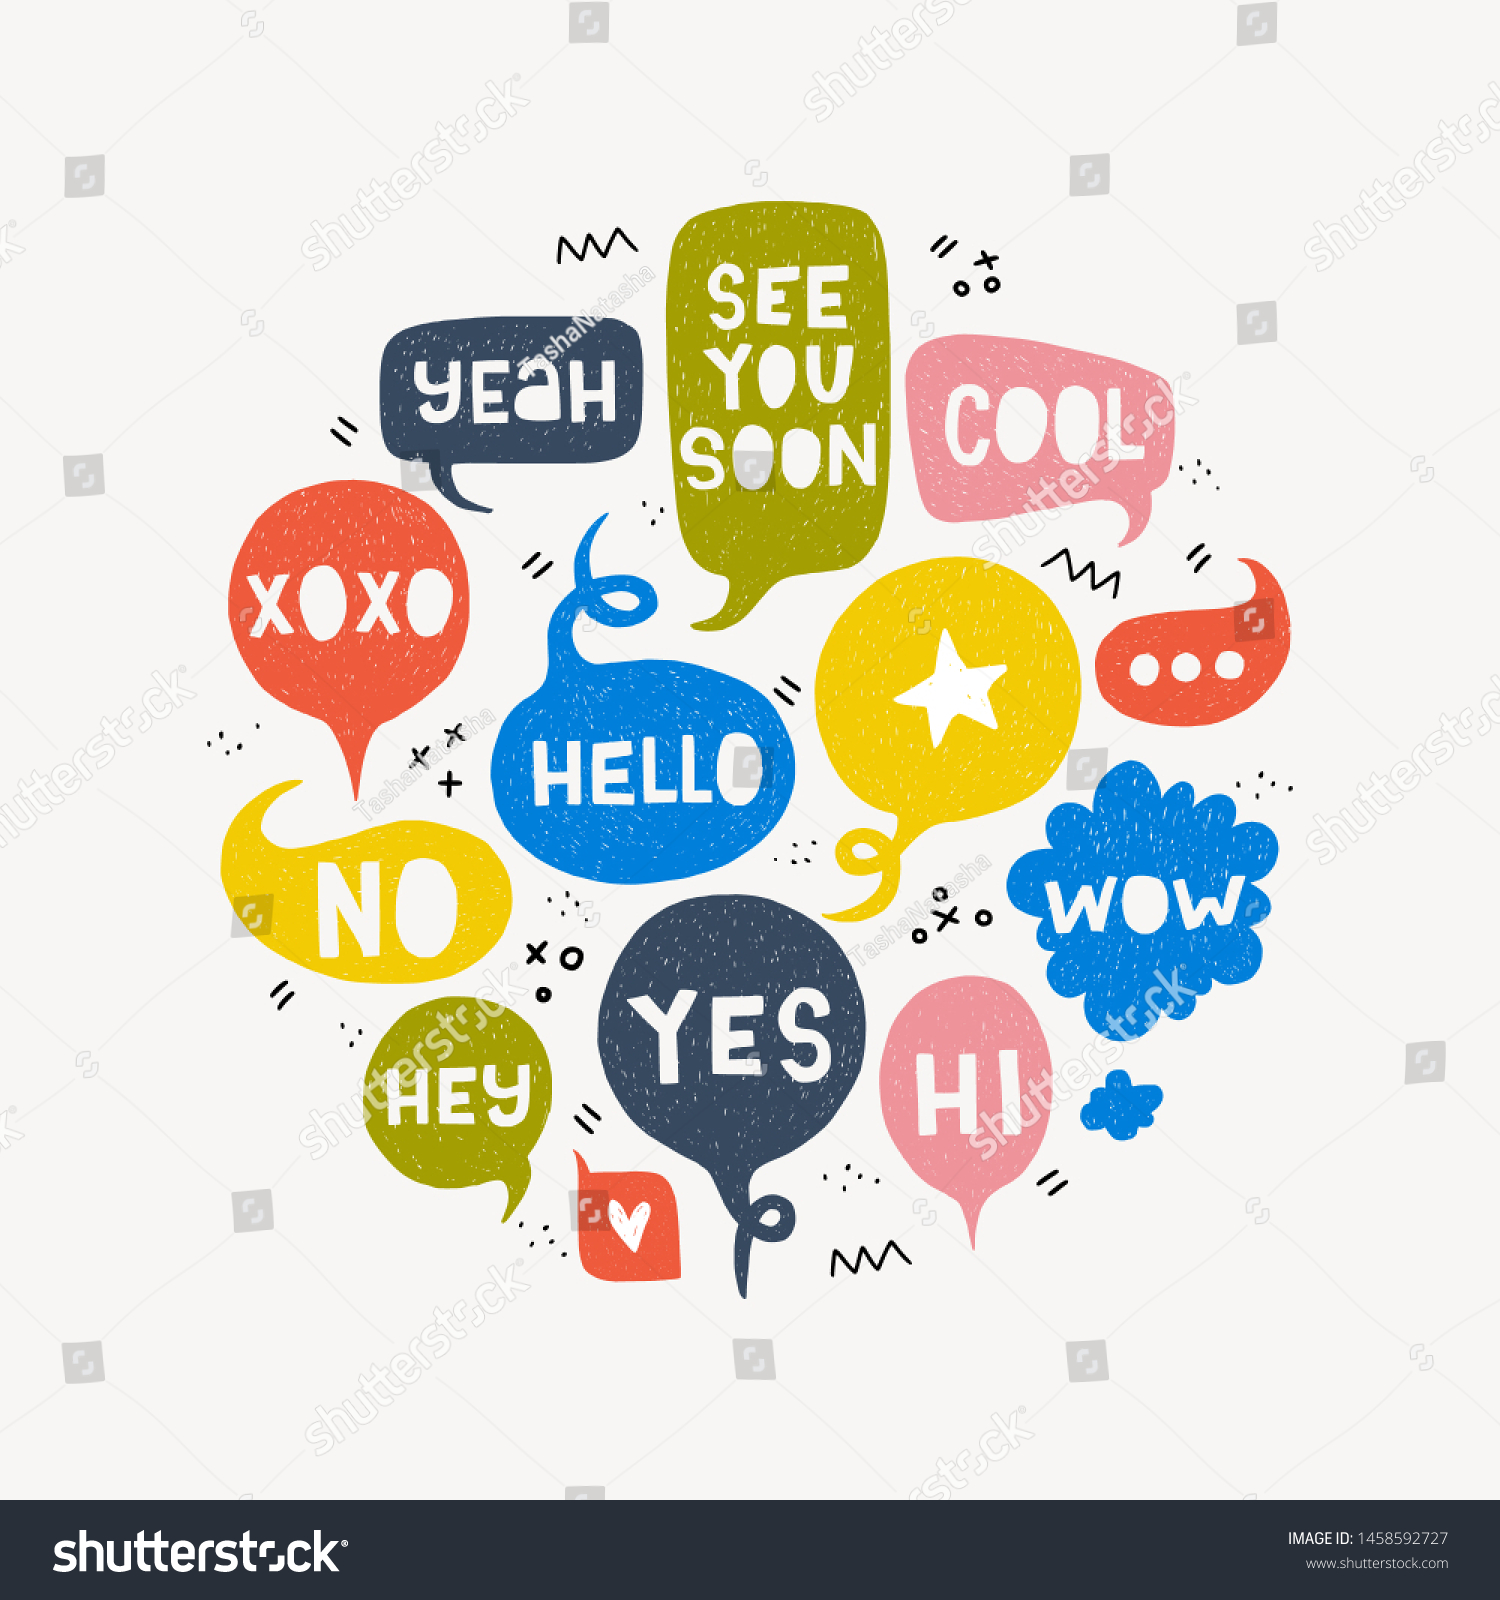 SVG of Speech bubble set with typography exclamation Hi, Hello, Yes, No, Wow, Like, Cool, Hey, Yeah, See You Soon, Xoxo. Card with group of colorful balloons with talk expressions, marks and symbols. Vector svg